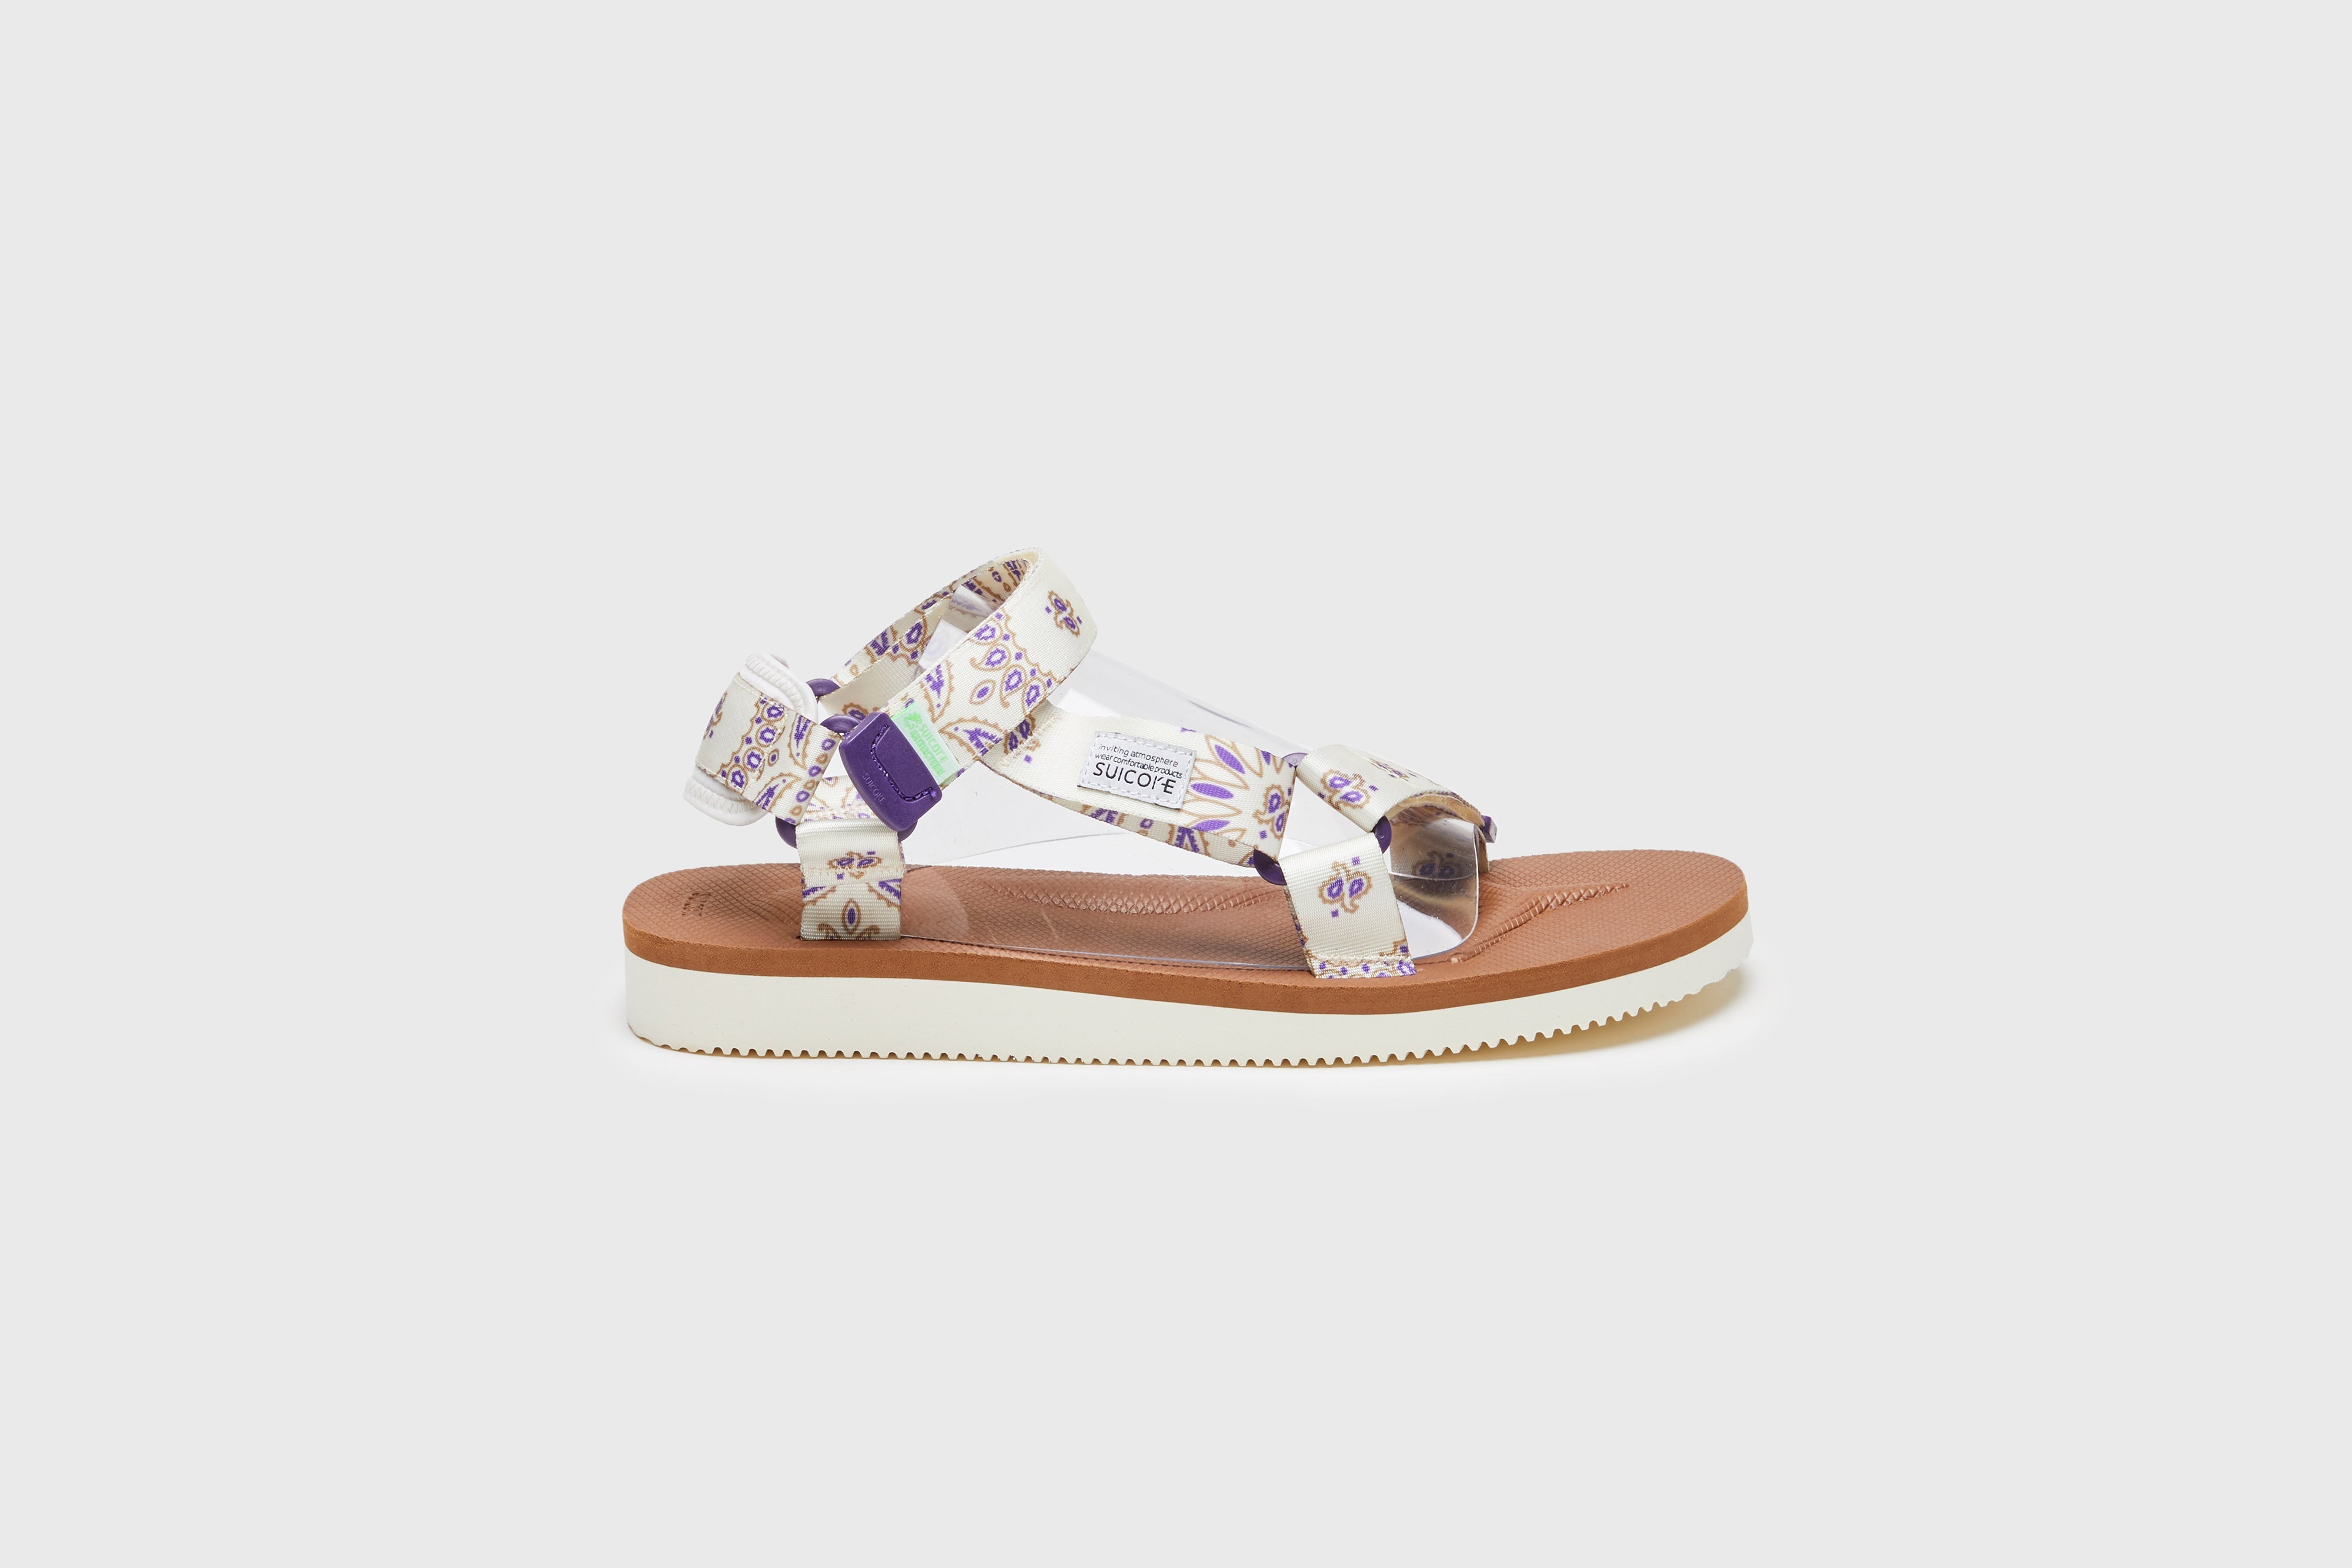 SUICOKE DEPA-Cab-PT05 sandals with ivory &amp; brown nylon upper, ivory &amp; brown midsole and sole, strap and logo patch. From Spring/Summer 2023 collection on eightywingold Web Store, an official partner of SUICOKE. OG-022CAB-PT05 IVORY X BROWN